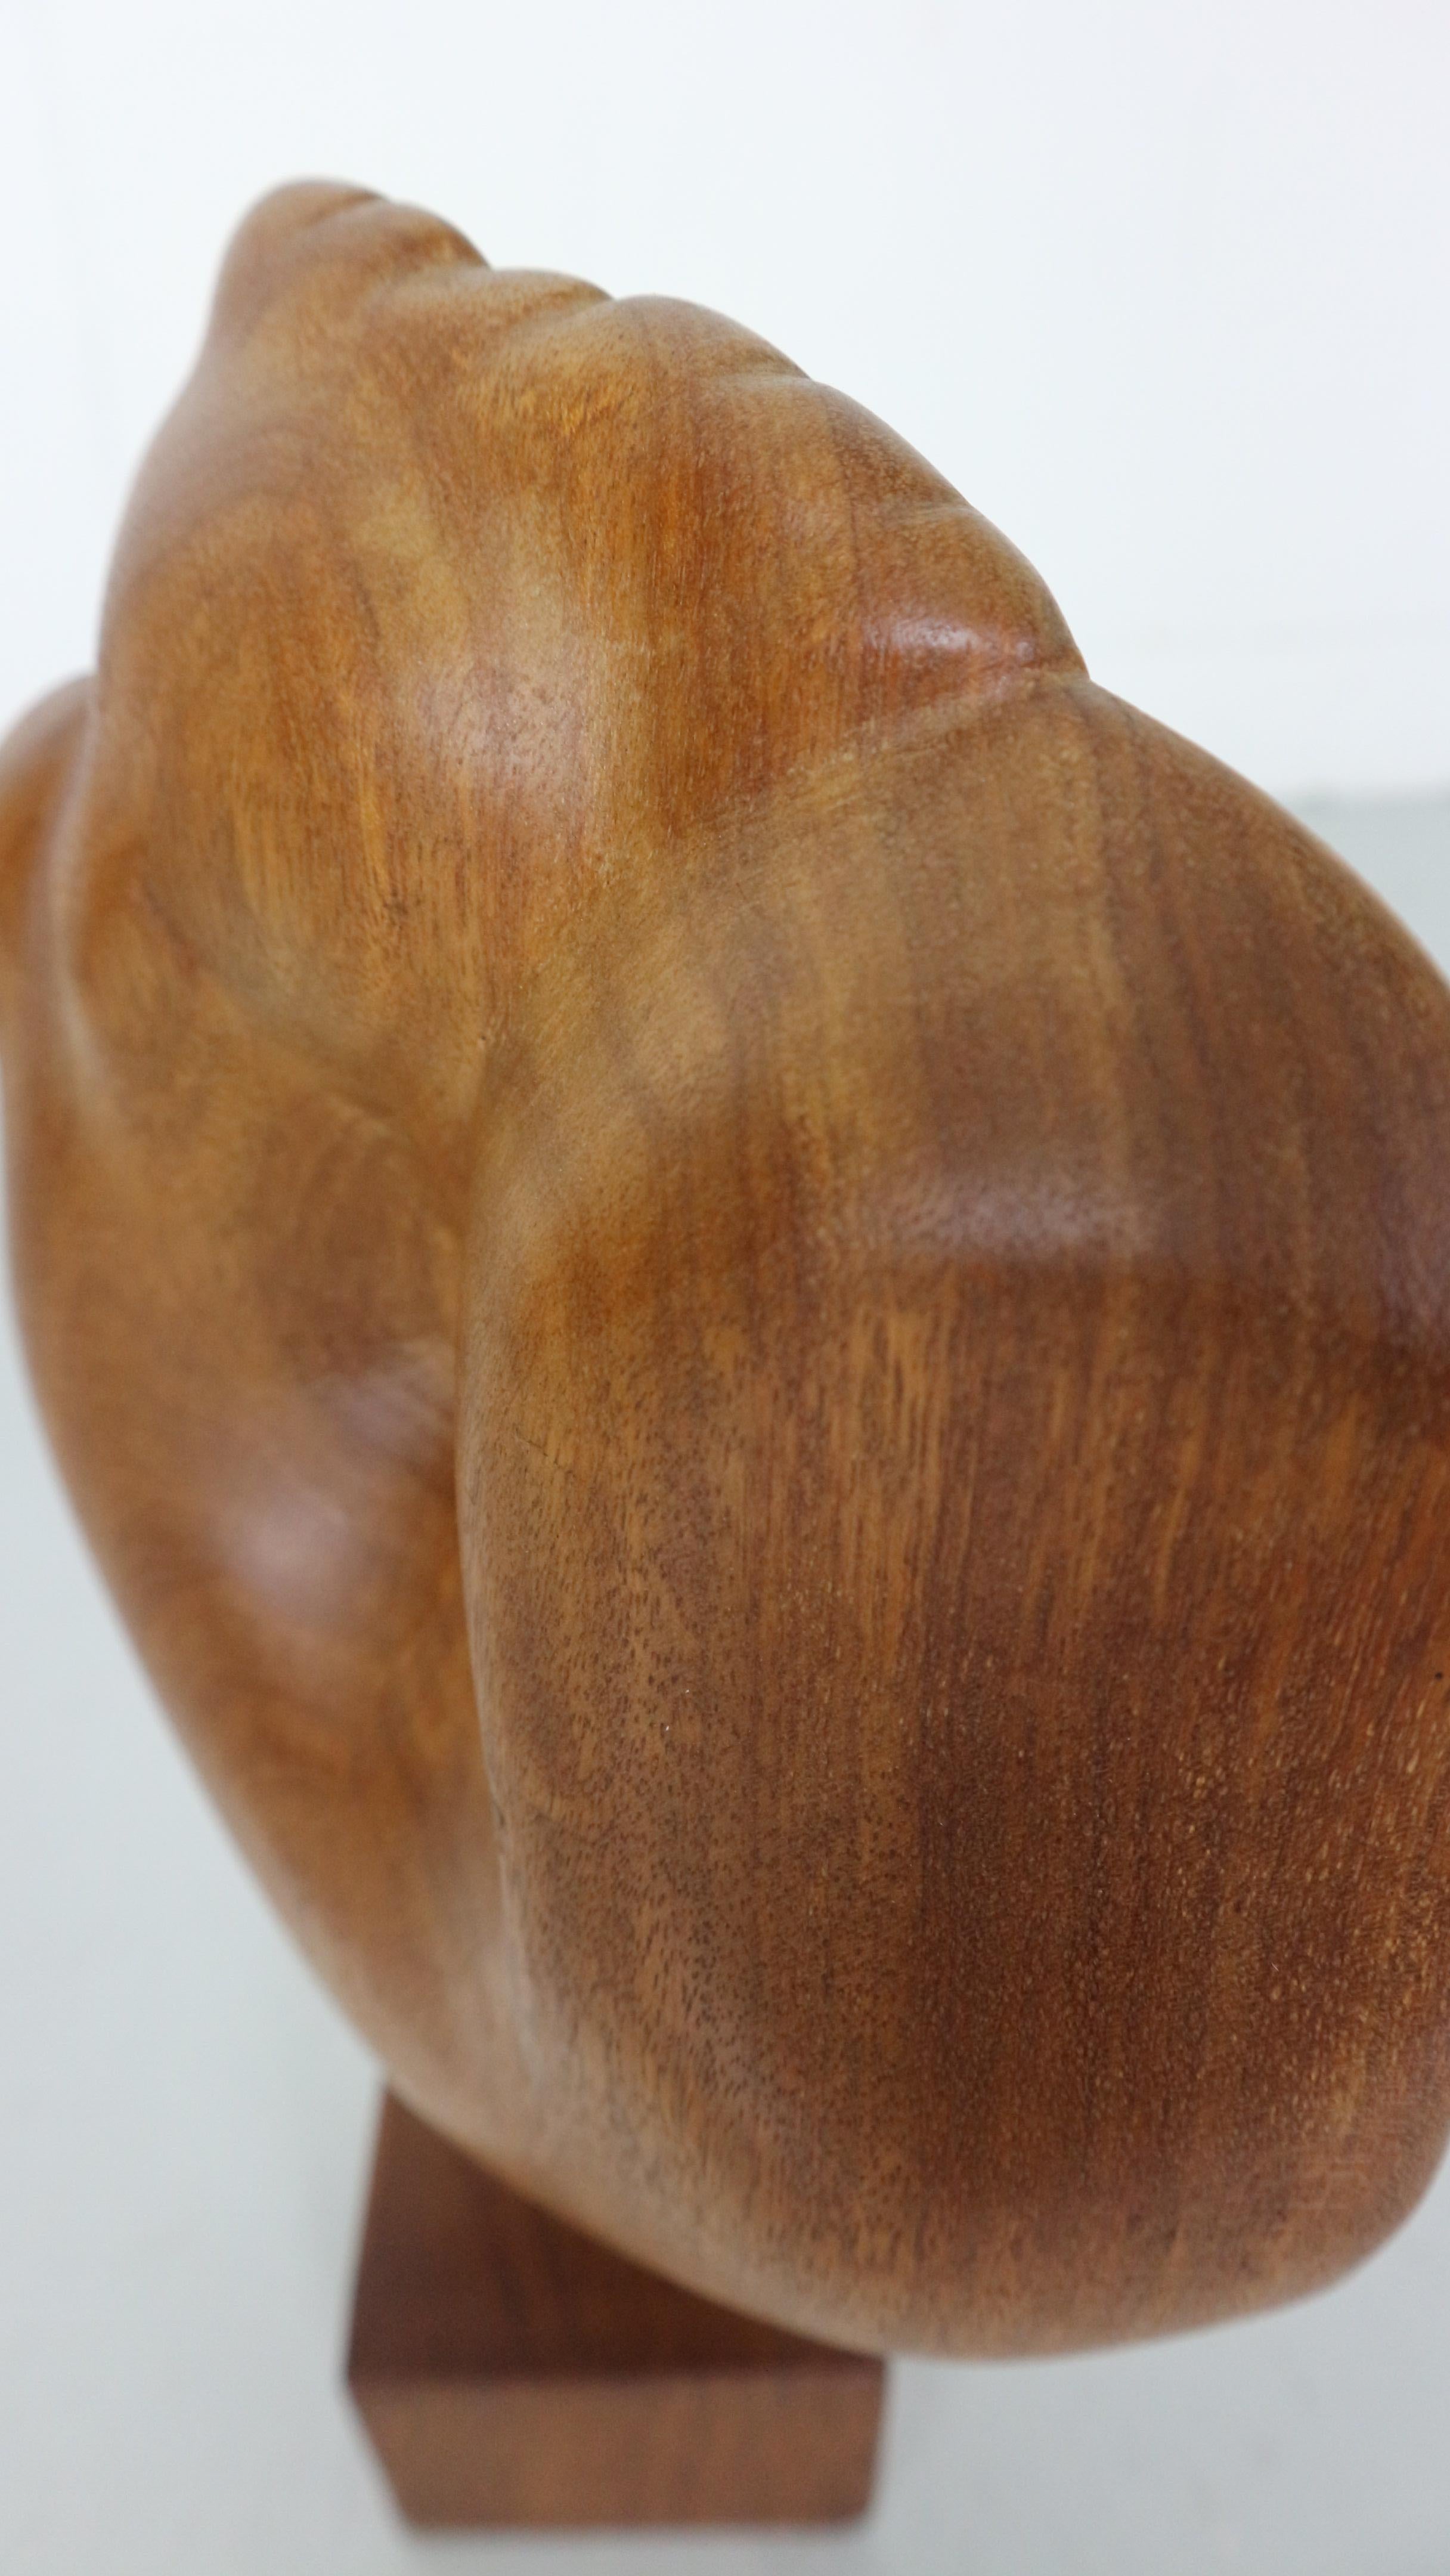 organically shaped wood sculpture 1950s Netherlands, Rooster 1